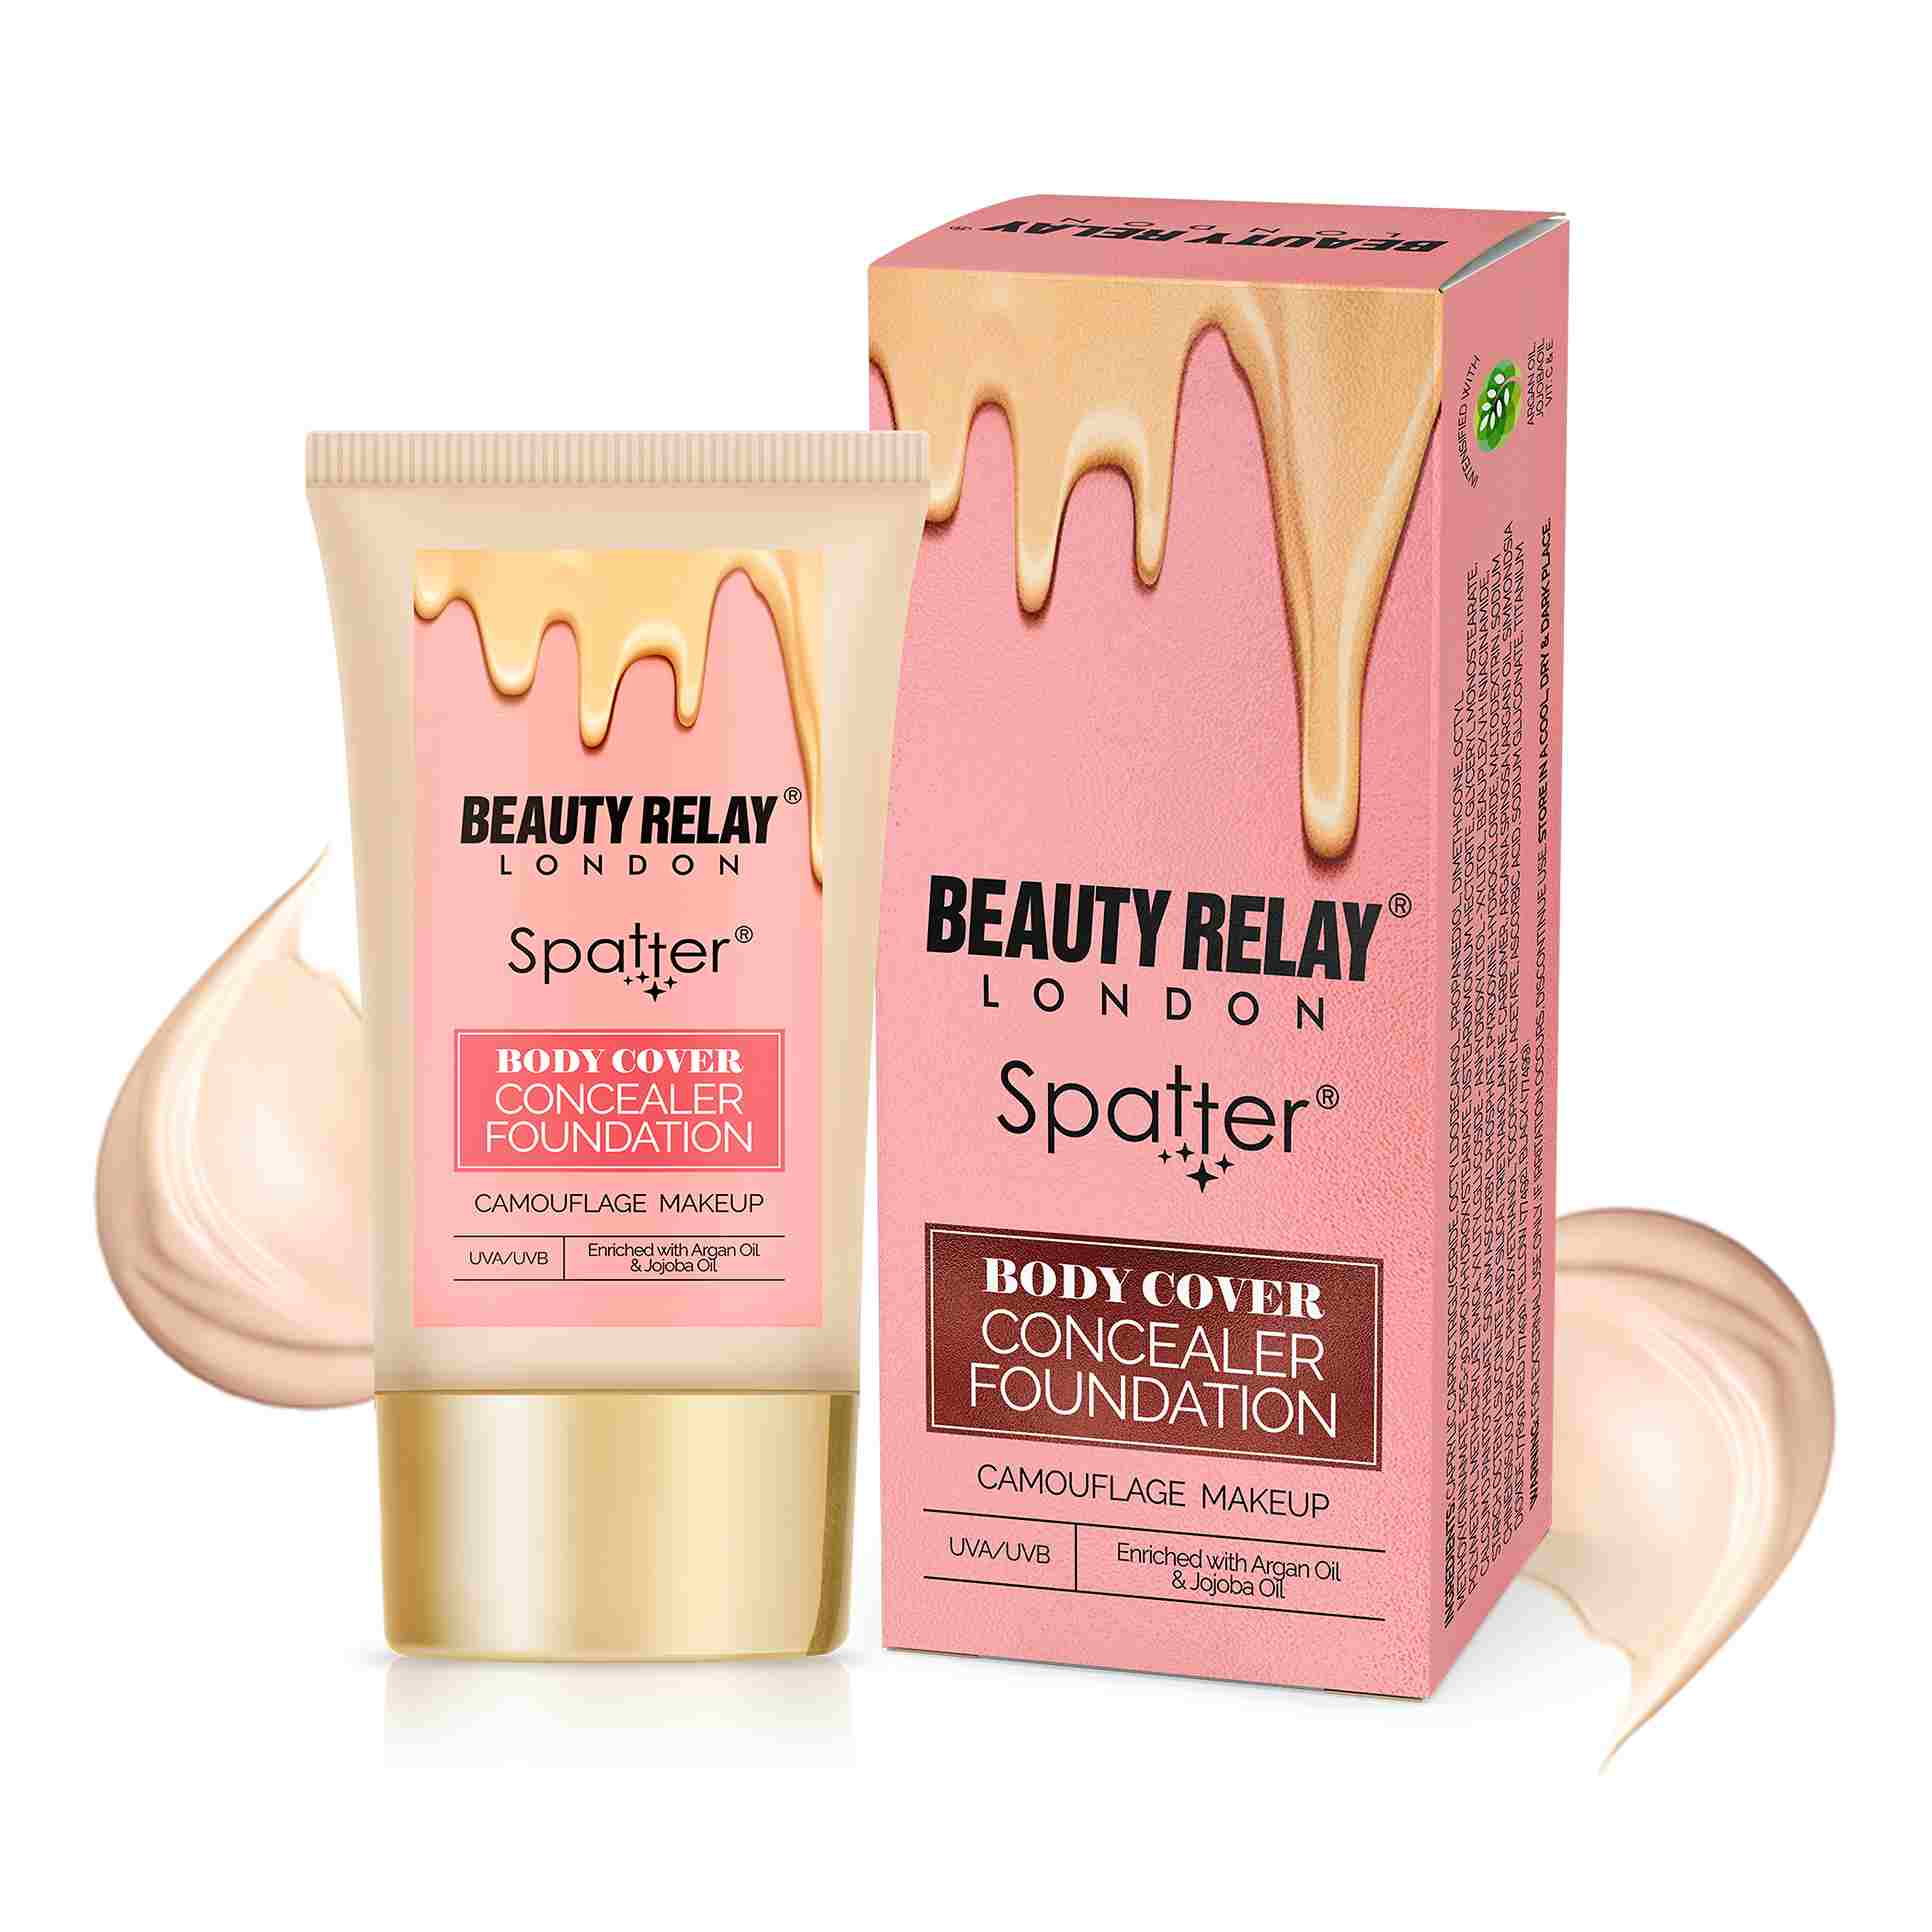 Spatter Body Cover Concealer Foundation - 40ml